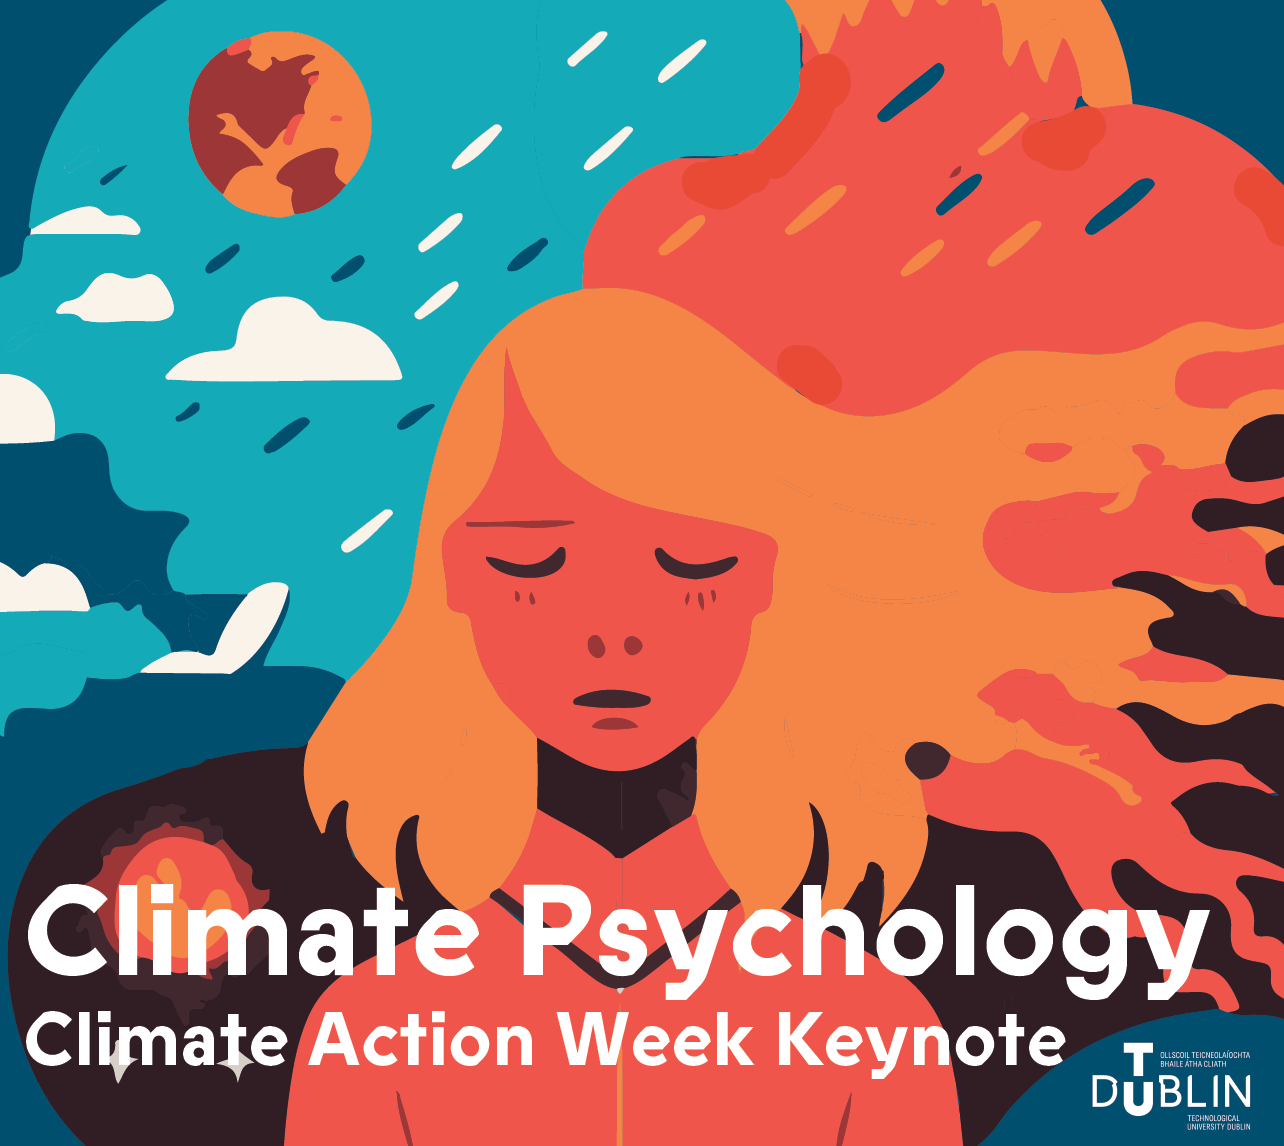 Image for Climate Action Week Keynote: Climate Psychology - with Dr Eoin Galavan, Psychological Society of Ireland